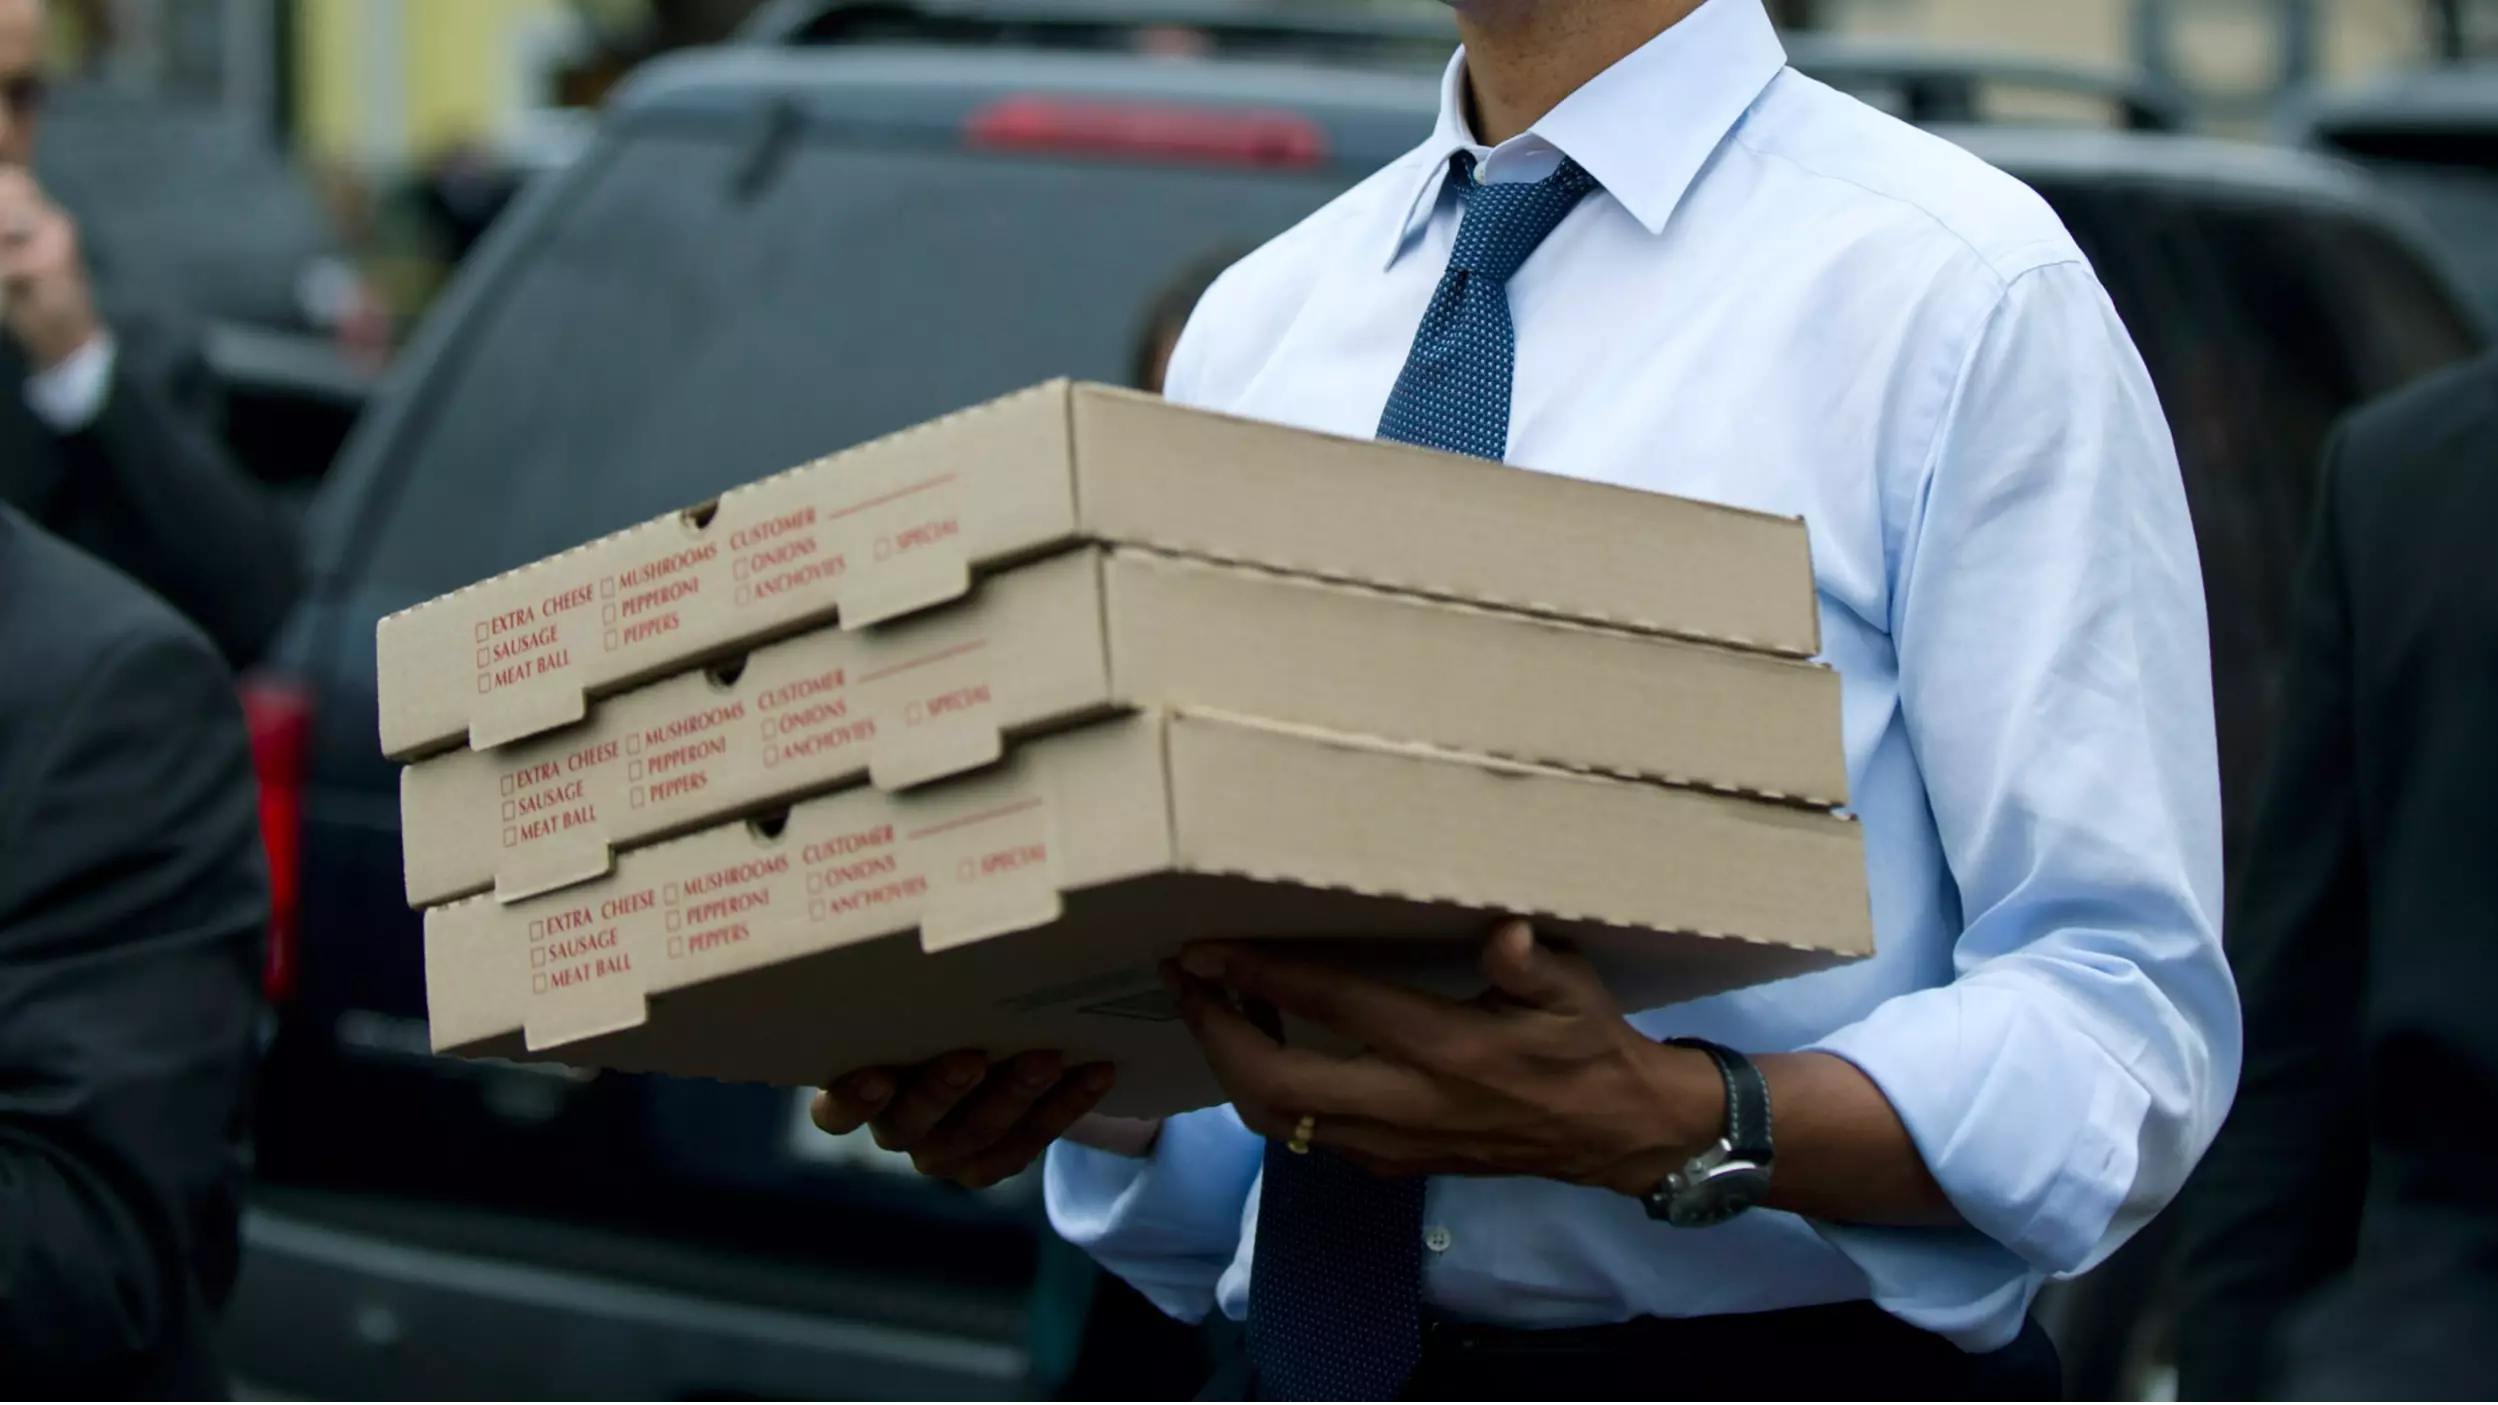 Receptionist Wins £23,000 After Being Excluded From Office 'Pizza Fridays'